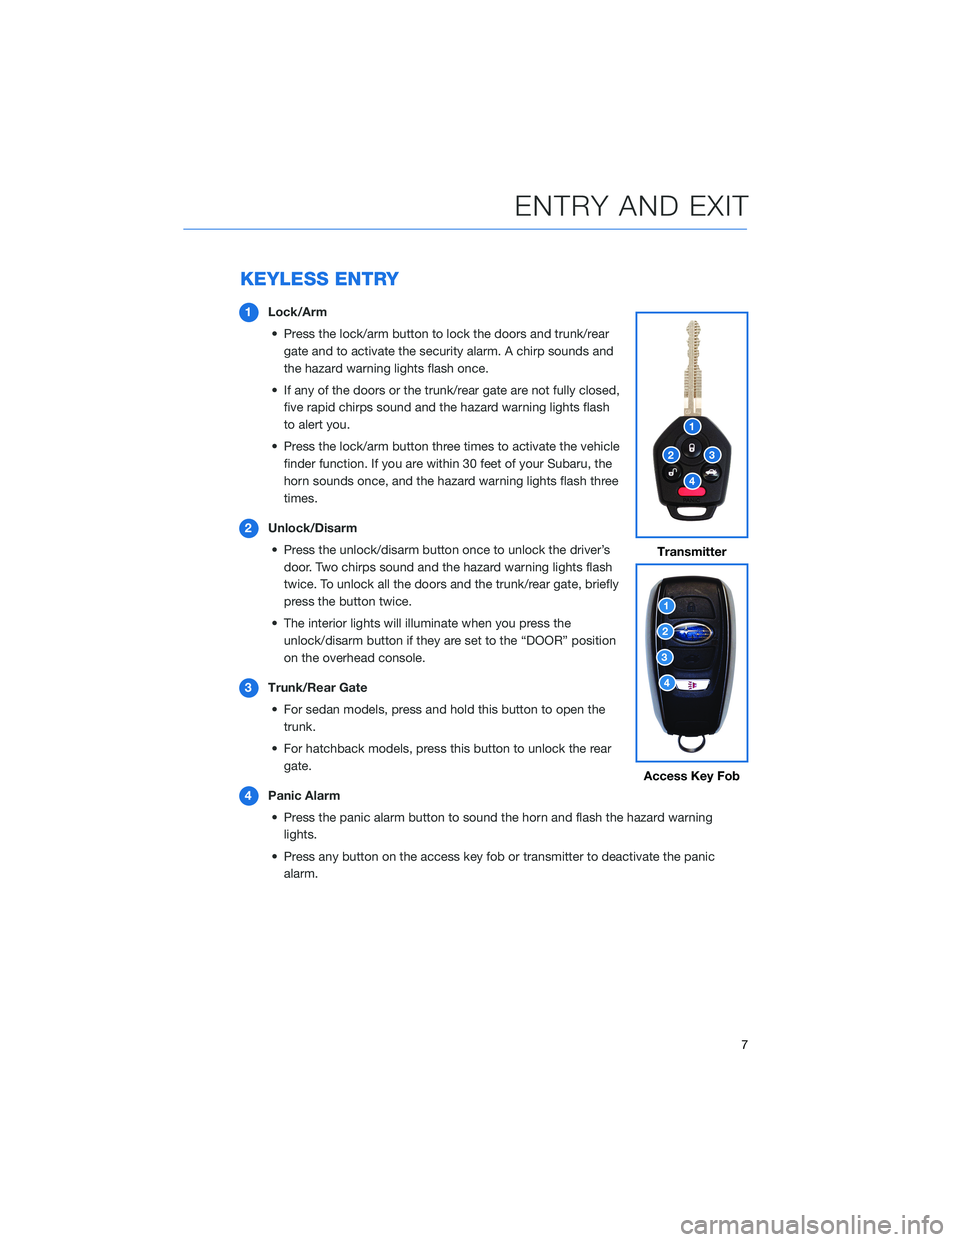 SUBARU IMPREZA 2022  Getting Started Guide KEYLESS ENTRY
1Lock/Arm
• Press the lock/arm button to lock the doors and trunk/rear gate and to activate the security alarm. A chirp sounds and
the hazard warning lights flash once.
• If any of t